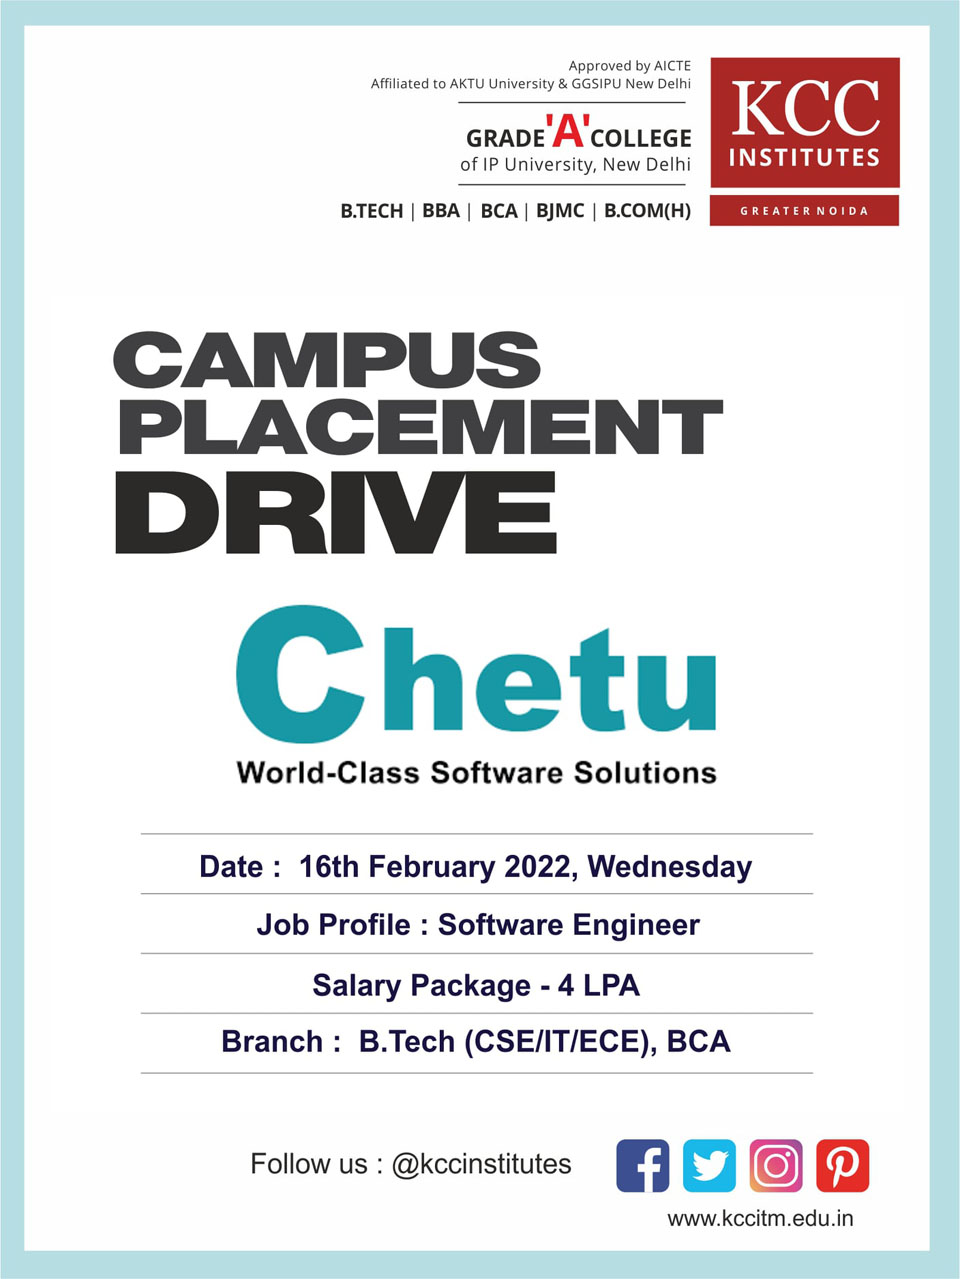 Campus Placement Drive for Chetu on 16th February 2022 (Wednesday)